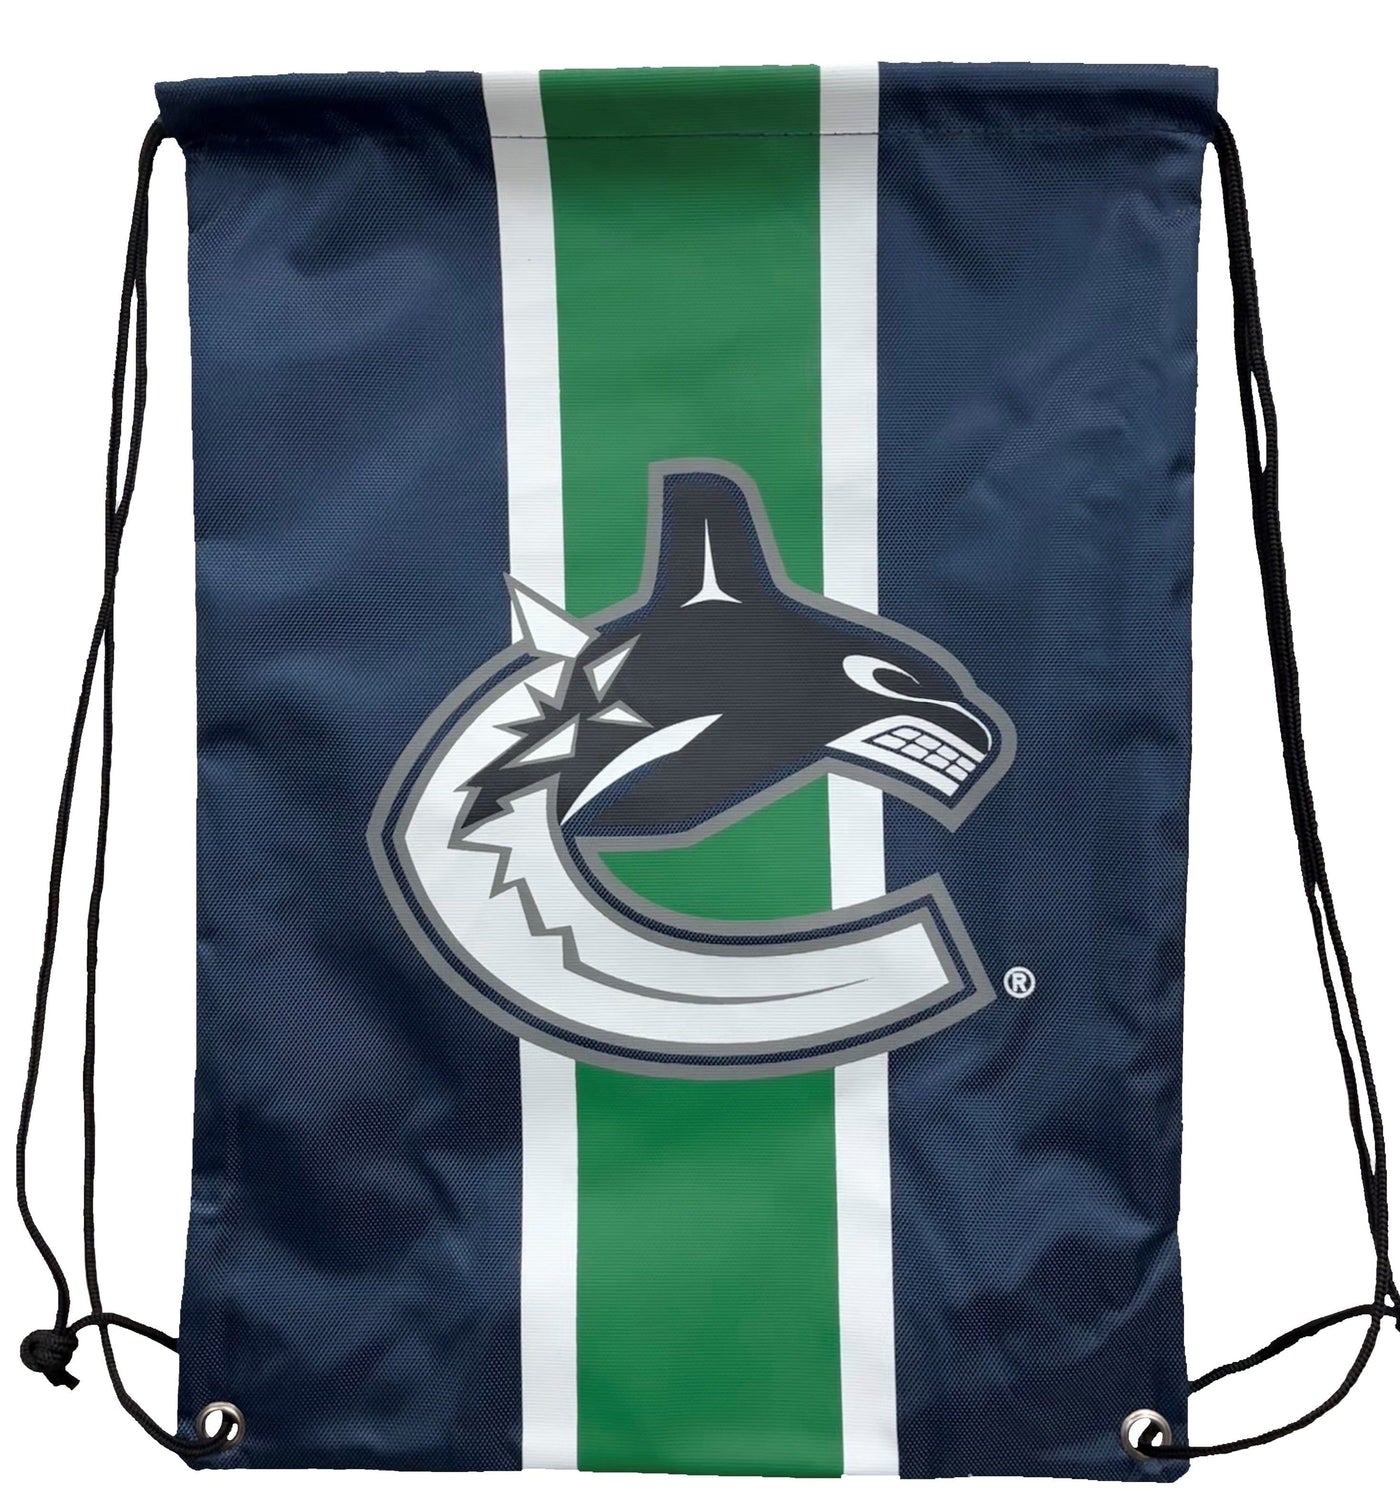 NHL Backpack Drawstring Bag - Vancouver Canucks - The Hockey Shop Source For Sports